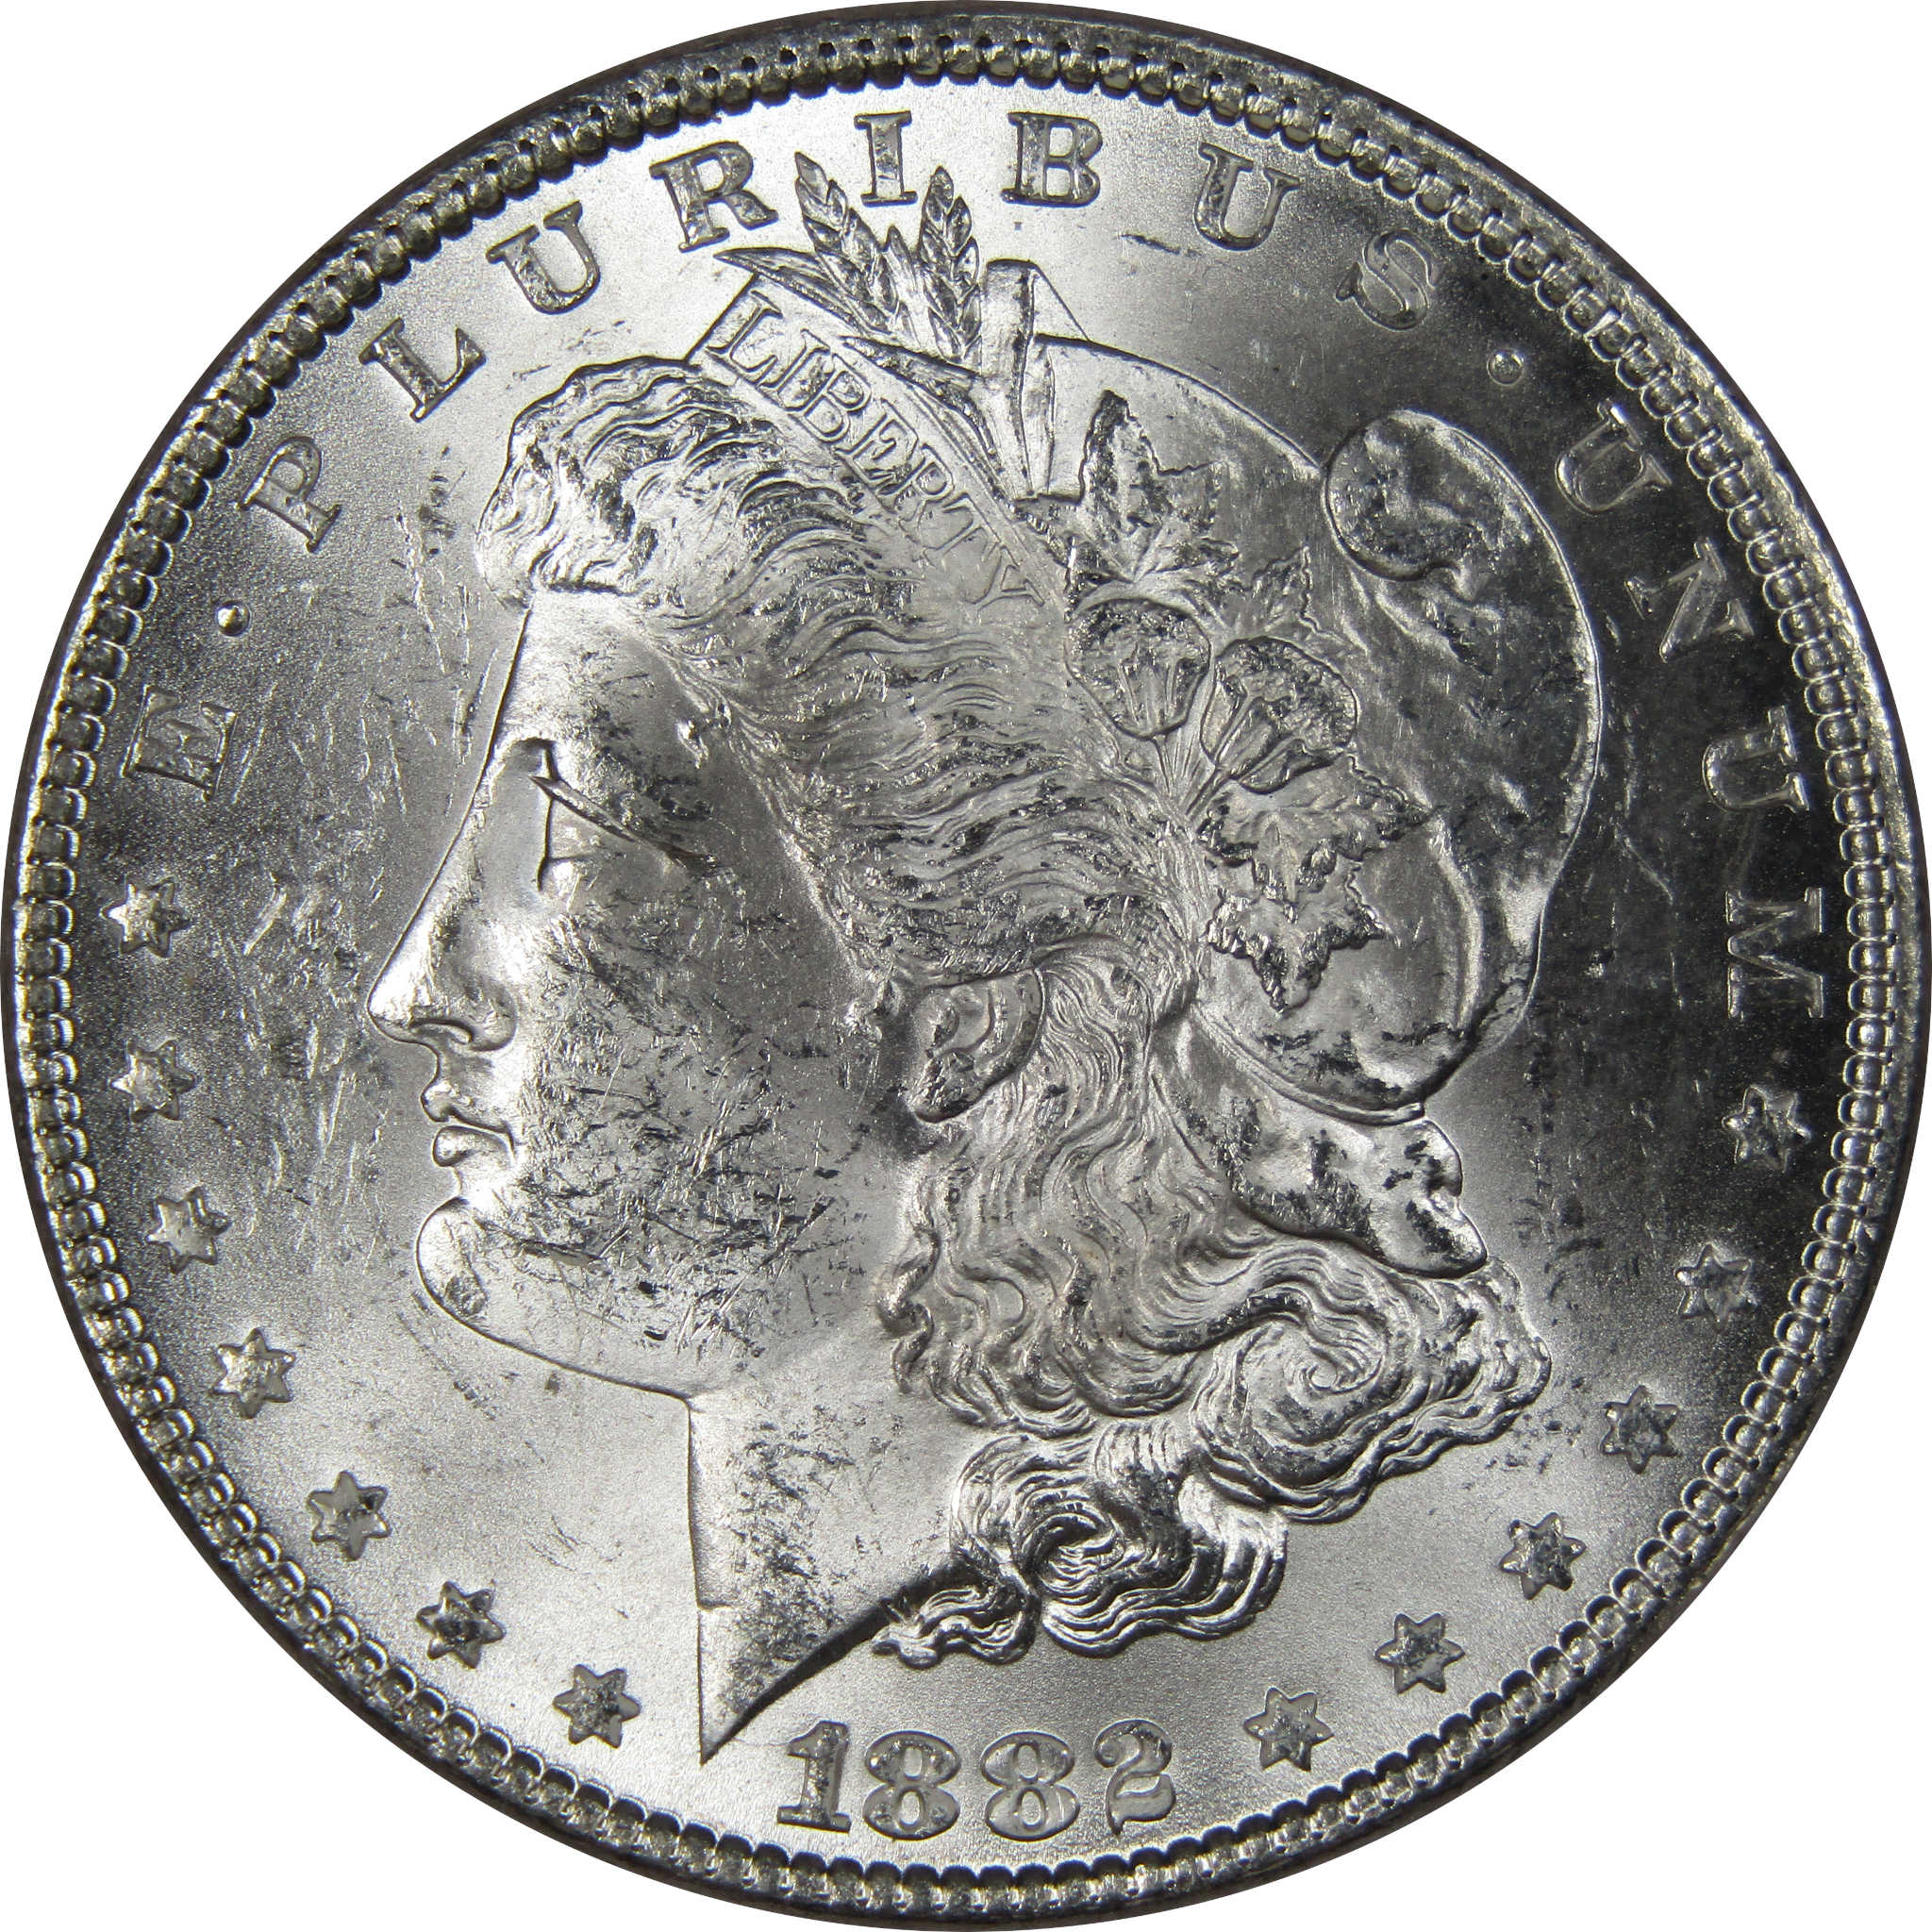 1882 Morgan Dollar BU Uncirculated Mint State 90% Silver SKU:IPC9642 - Morgan coin - Morgan silver dollar - Morgan silver dollar for sale - Profile Coins &amp; Collectibles